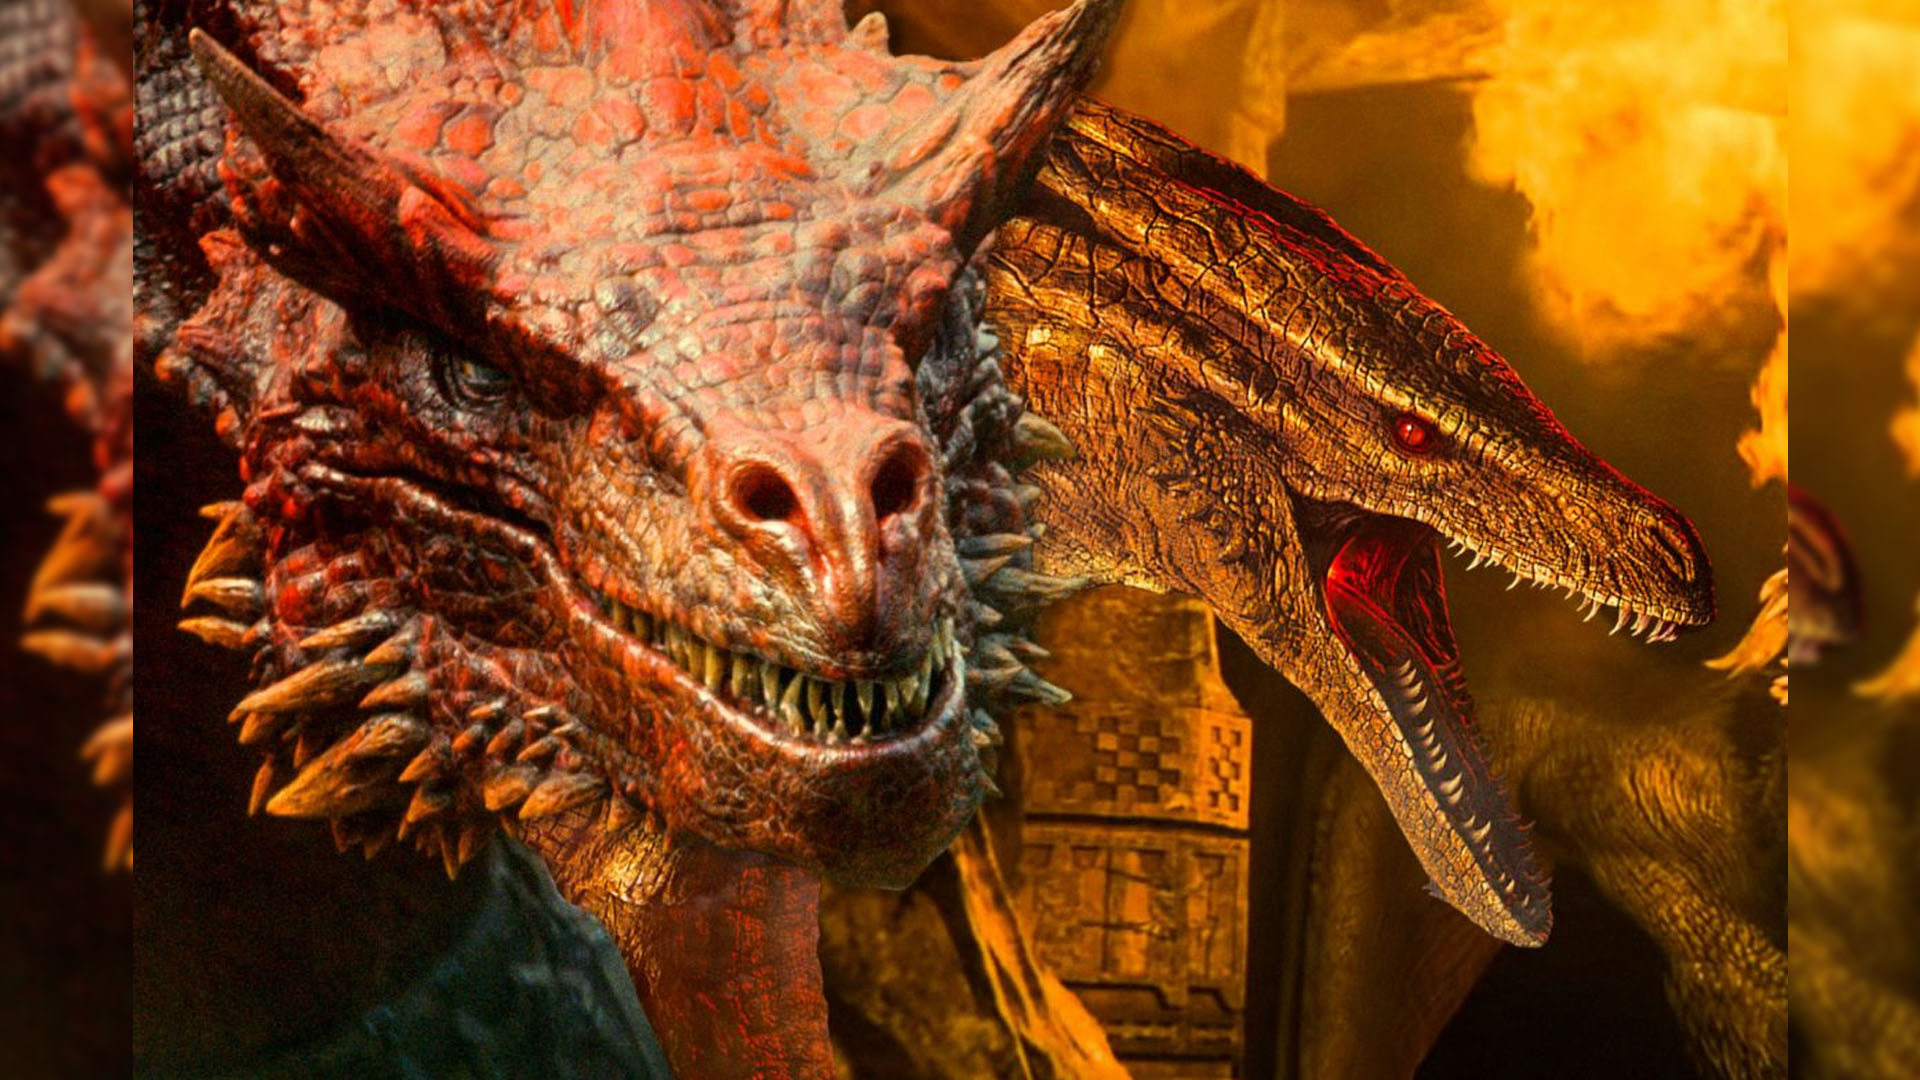 House of the Dragon fans want to know who wins: Drogon or Caraxes?